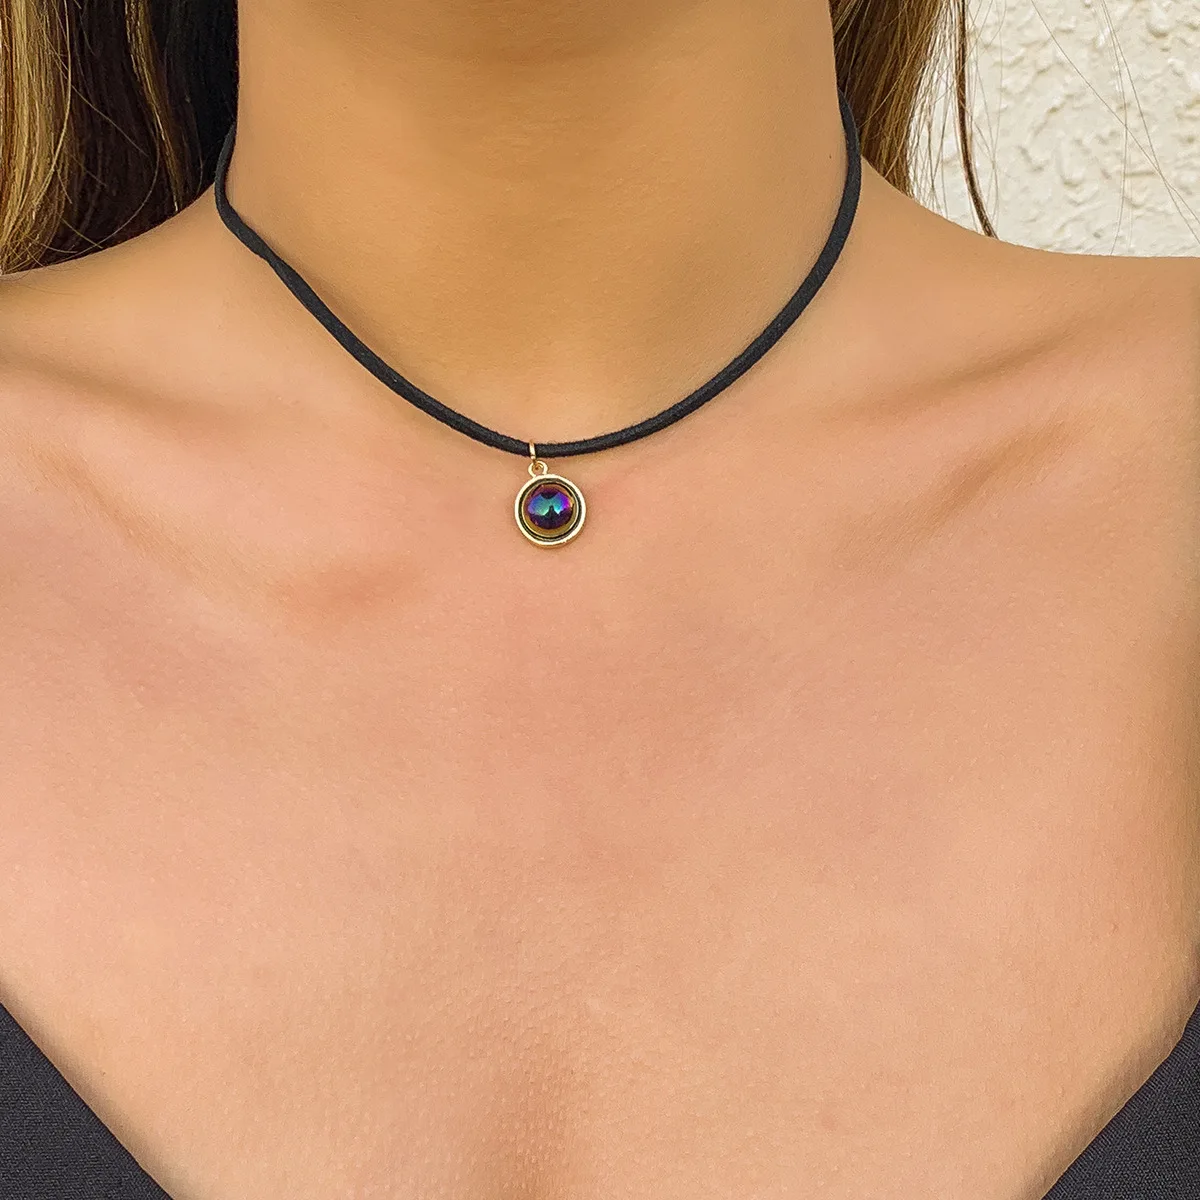 Retro Simple Blue Eye Pendant Necklace Female All-match Personality Fashion Black Wax Line Clavicle Necklaces Girl Lover Jewelry